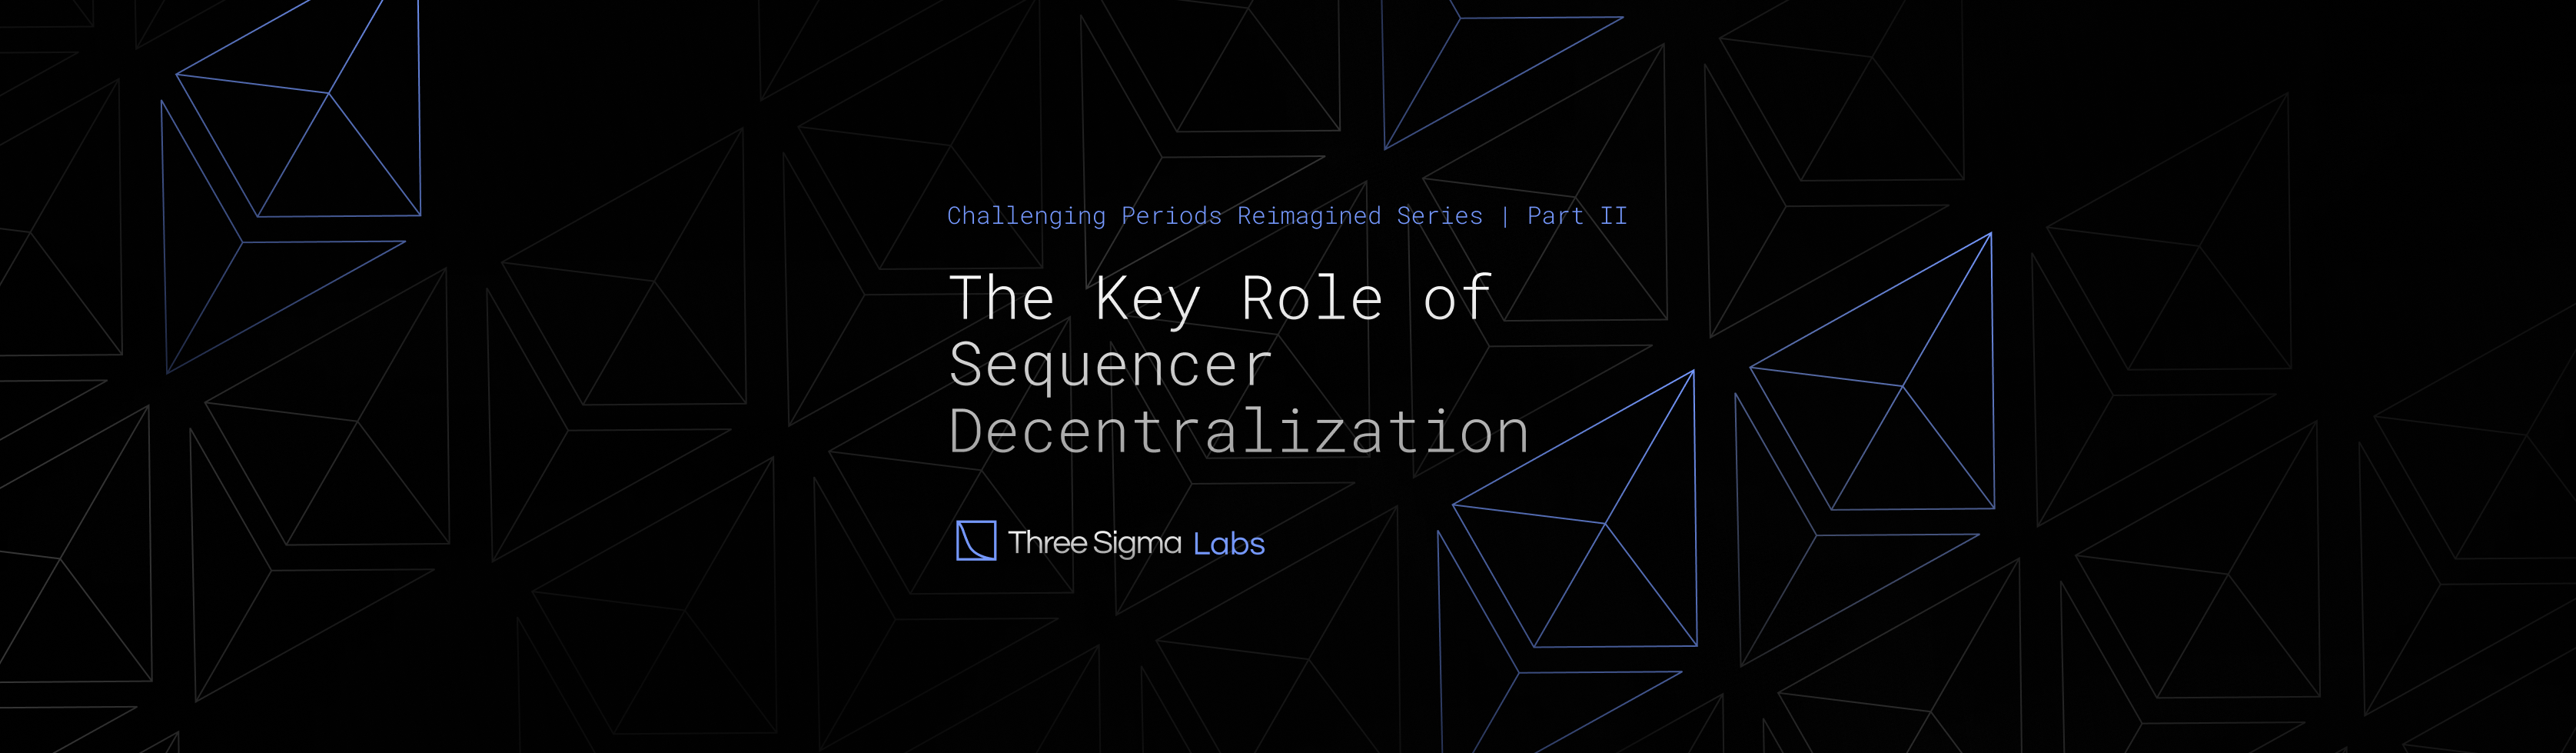 Cover Image for The Key Role of Sequencer Decentralization